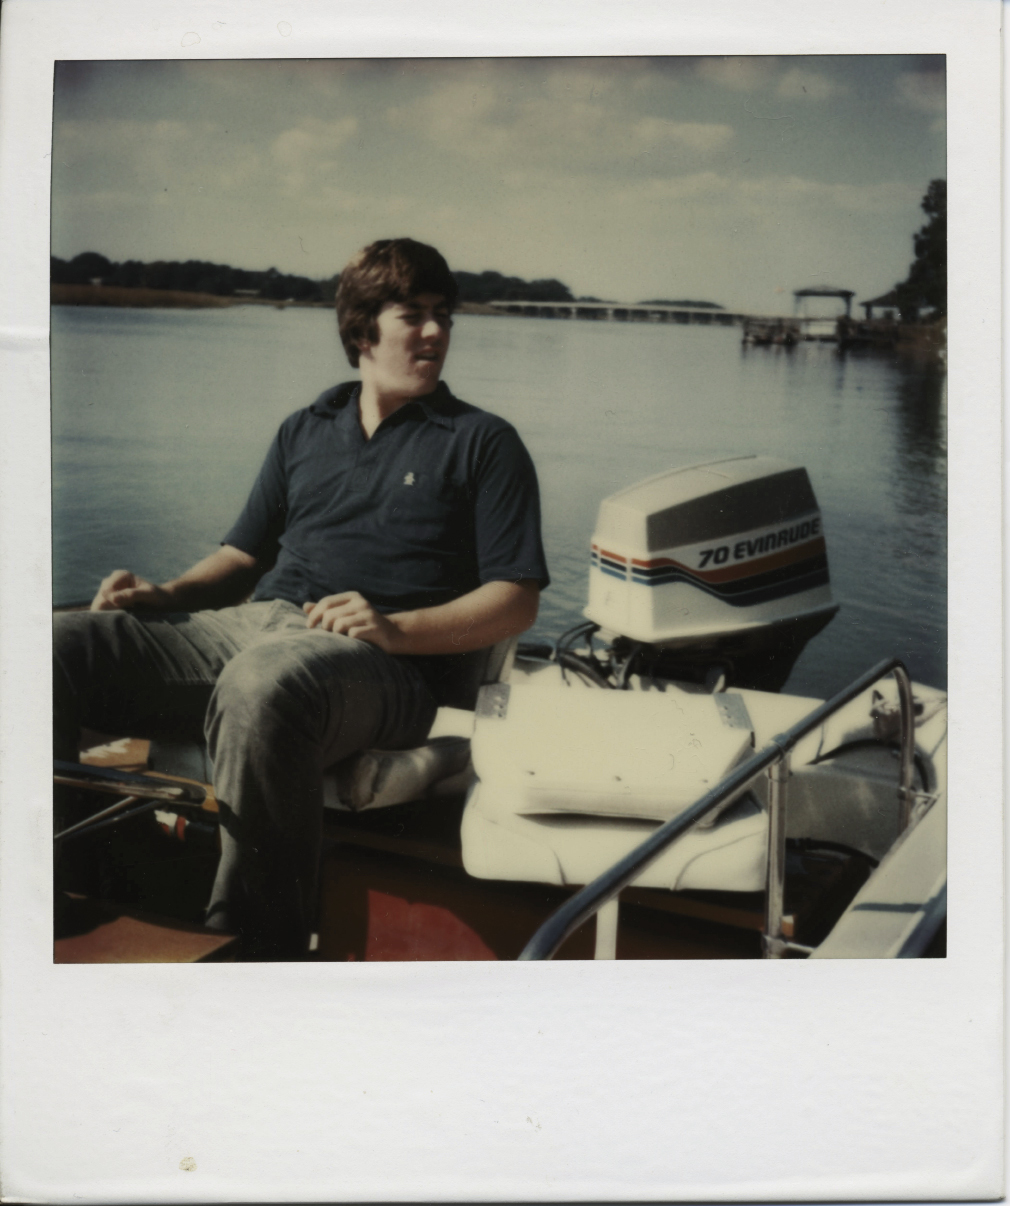 Author Julian Buxton as a 15-year-old in his boat